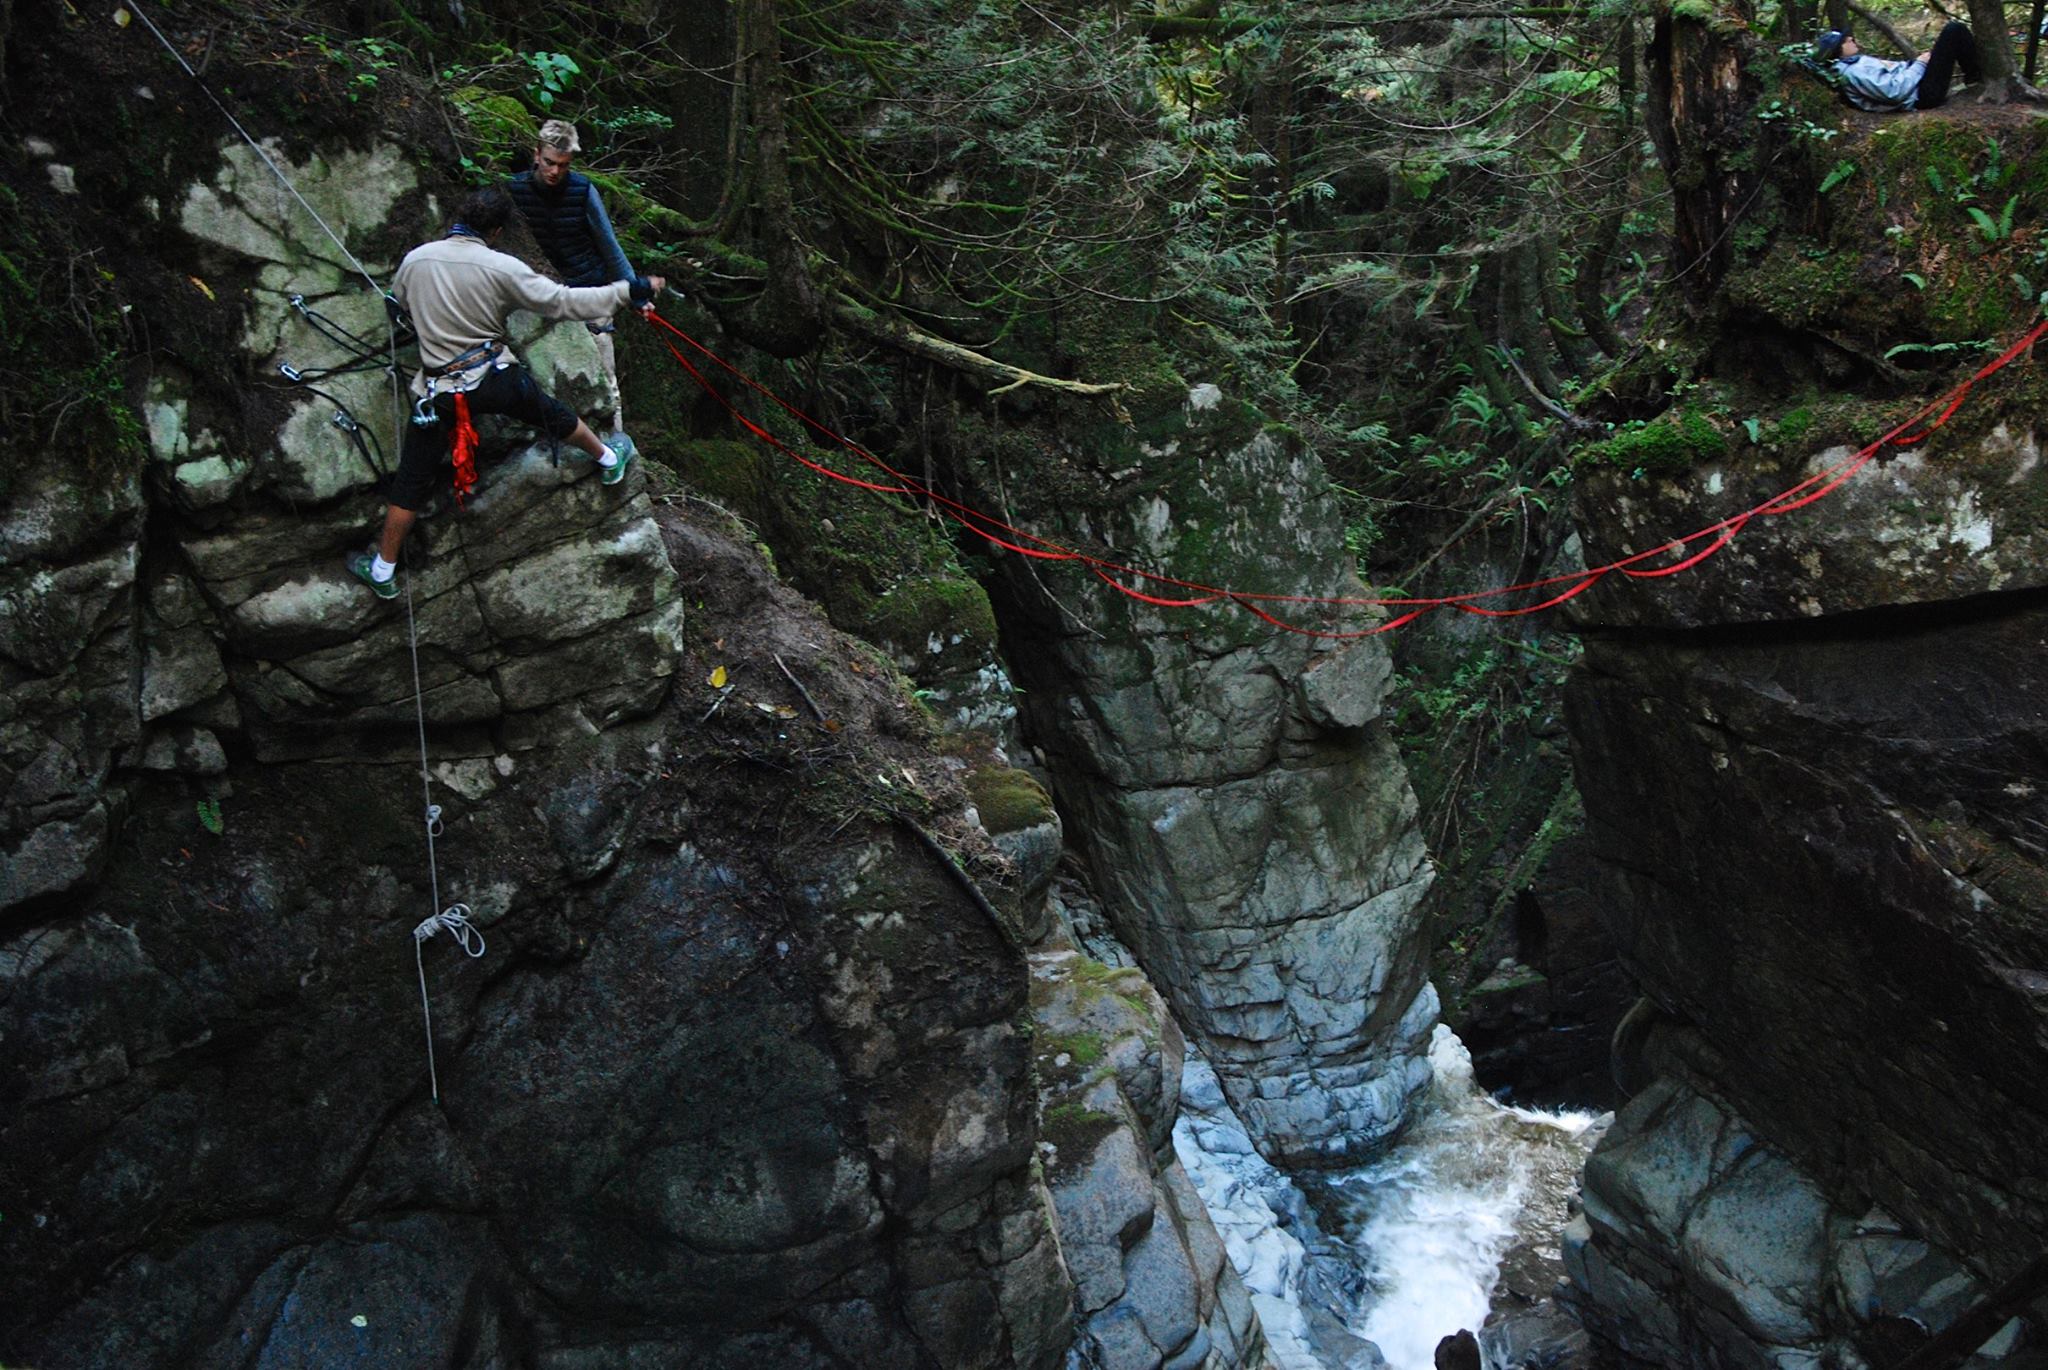 Taking it slow rigging a short 15m highline - feeling the intense pressure that I must **not** make a mistake - Cypress Falls, West Vancouver, BC, Canada